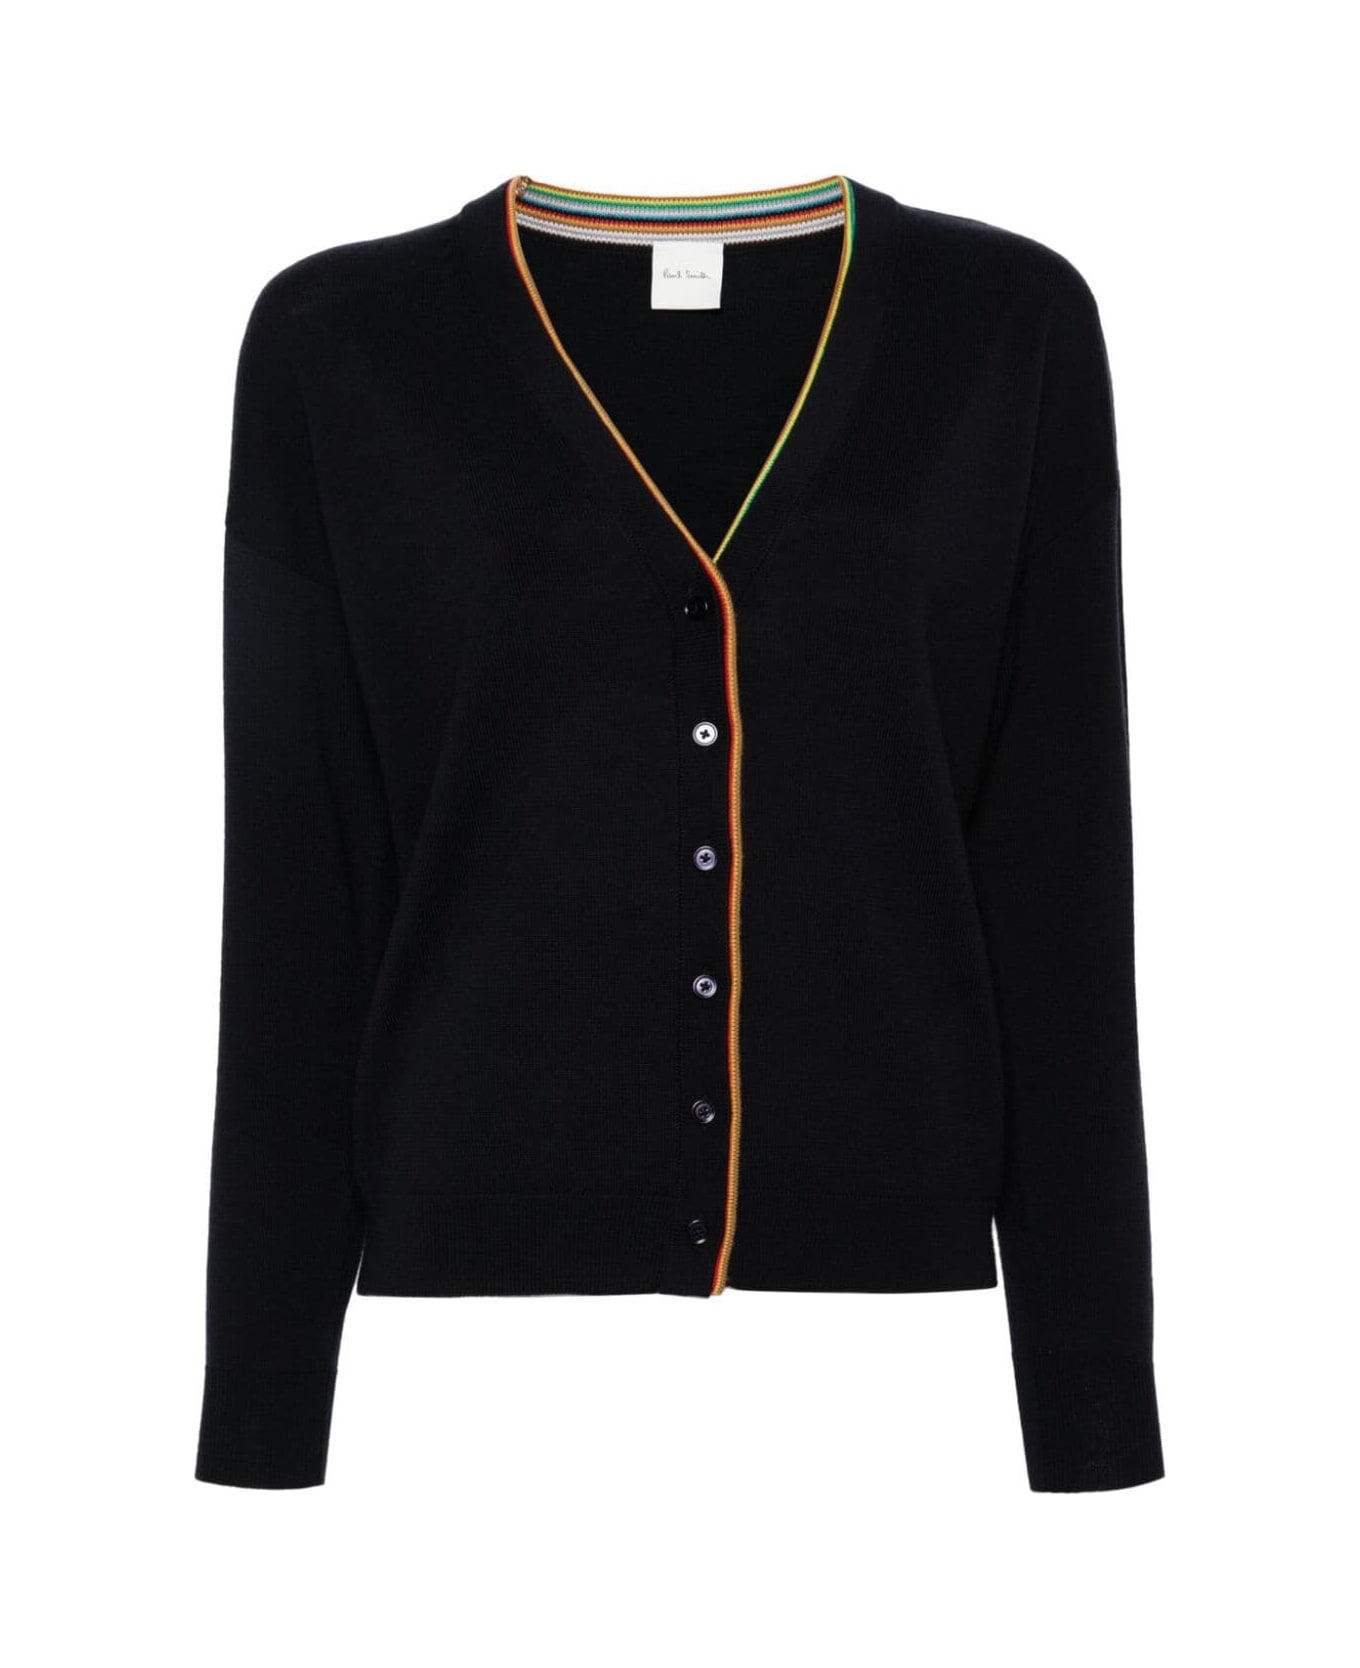 Paul Smith Knitted Buttoned Cardigan - A Multi カーディガン